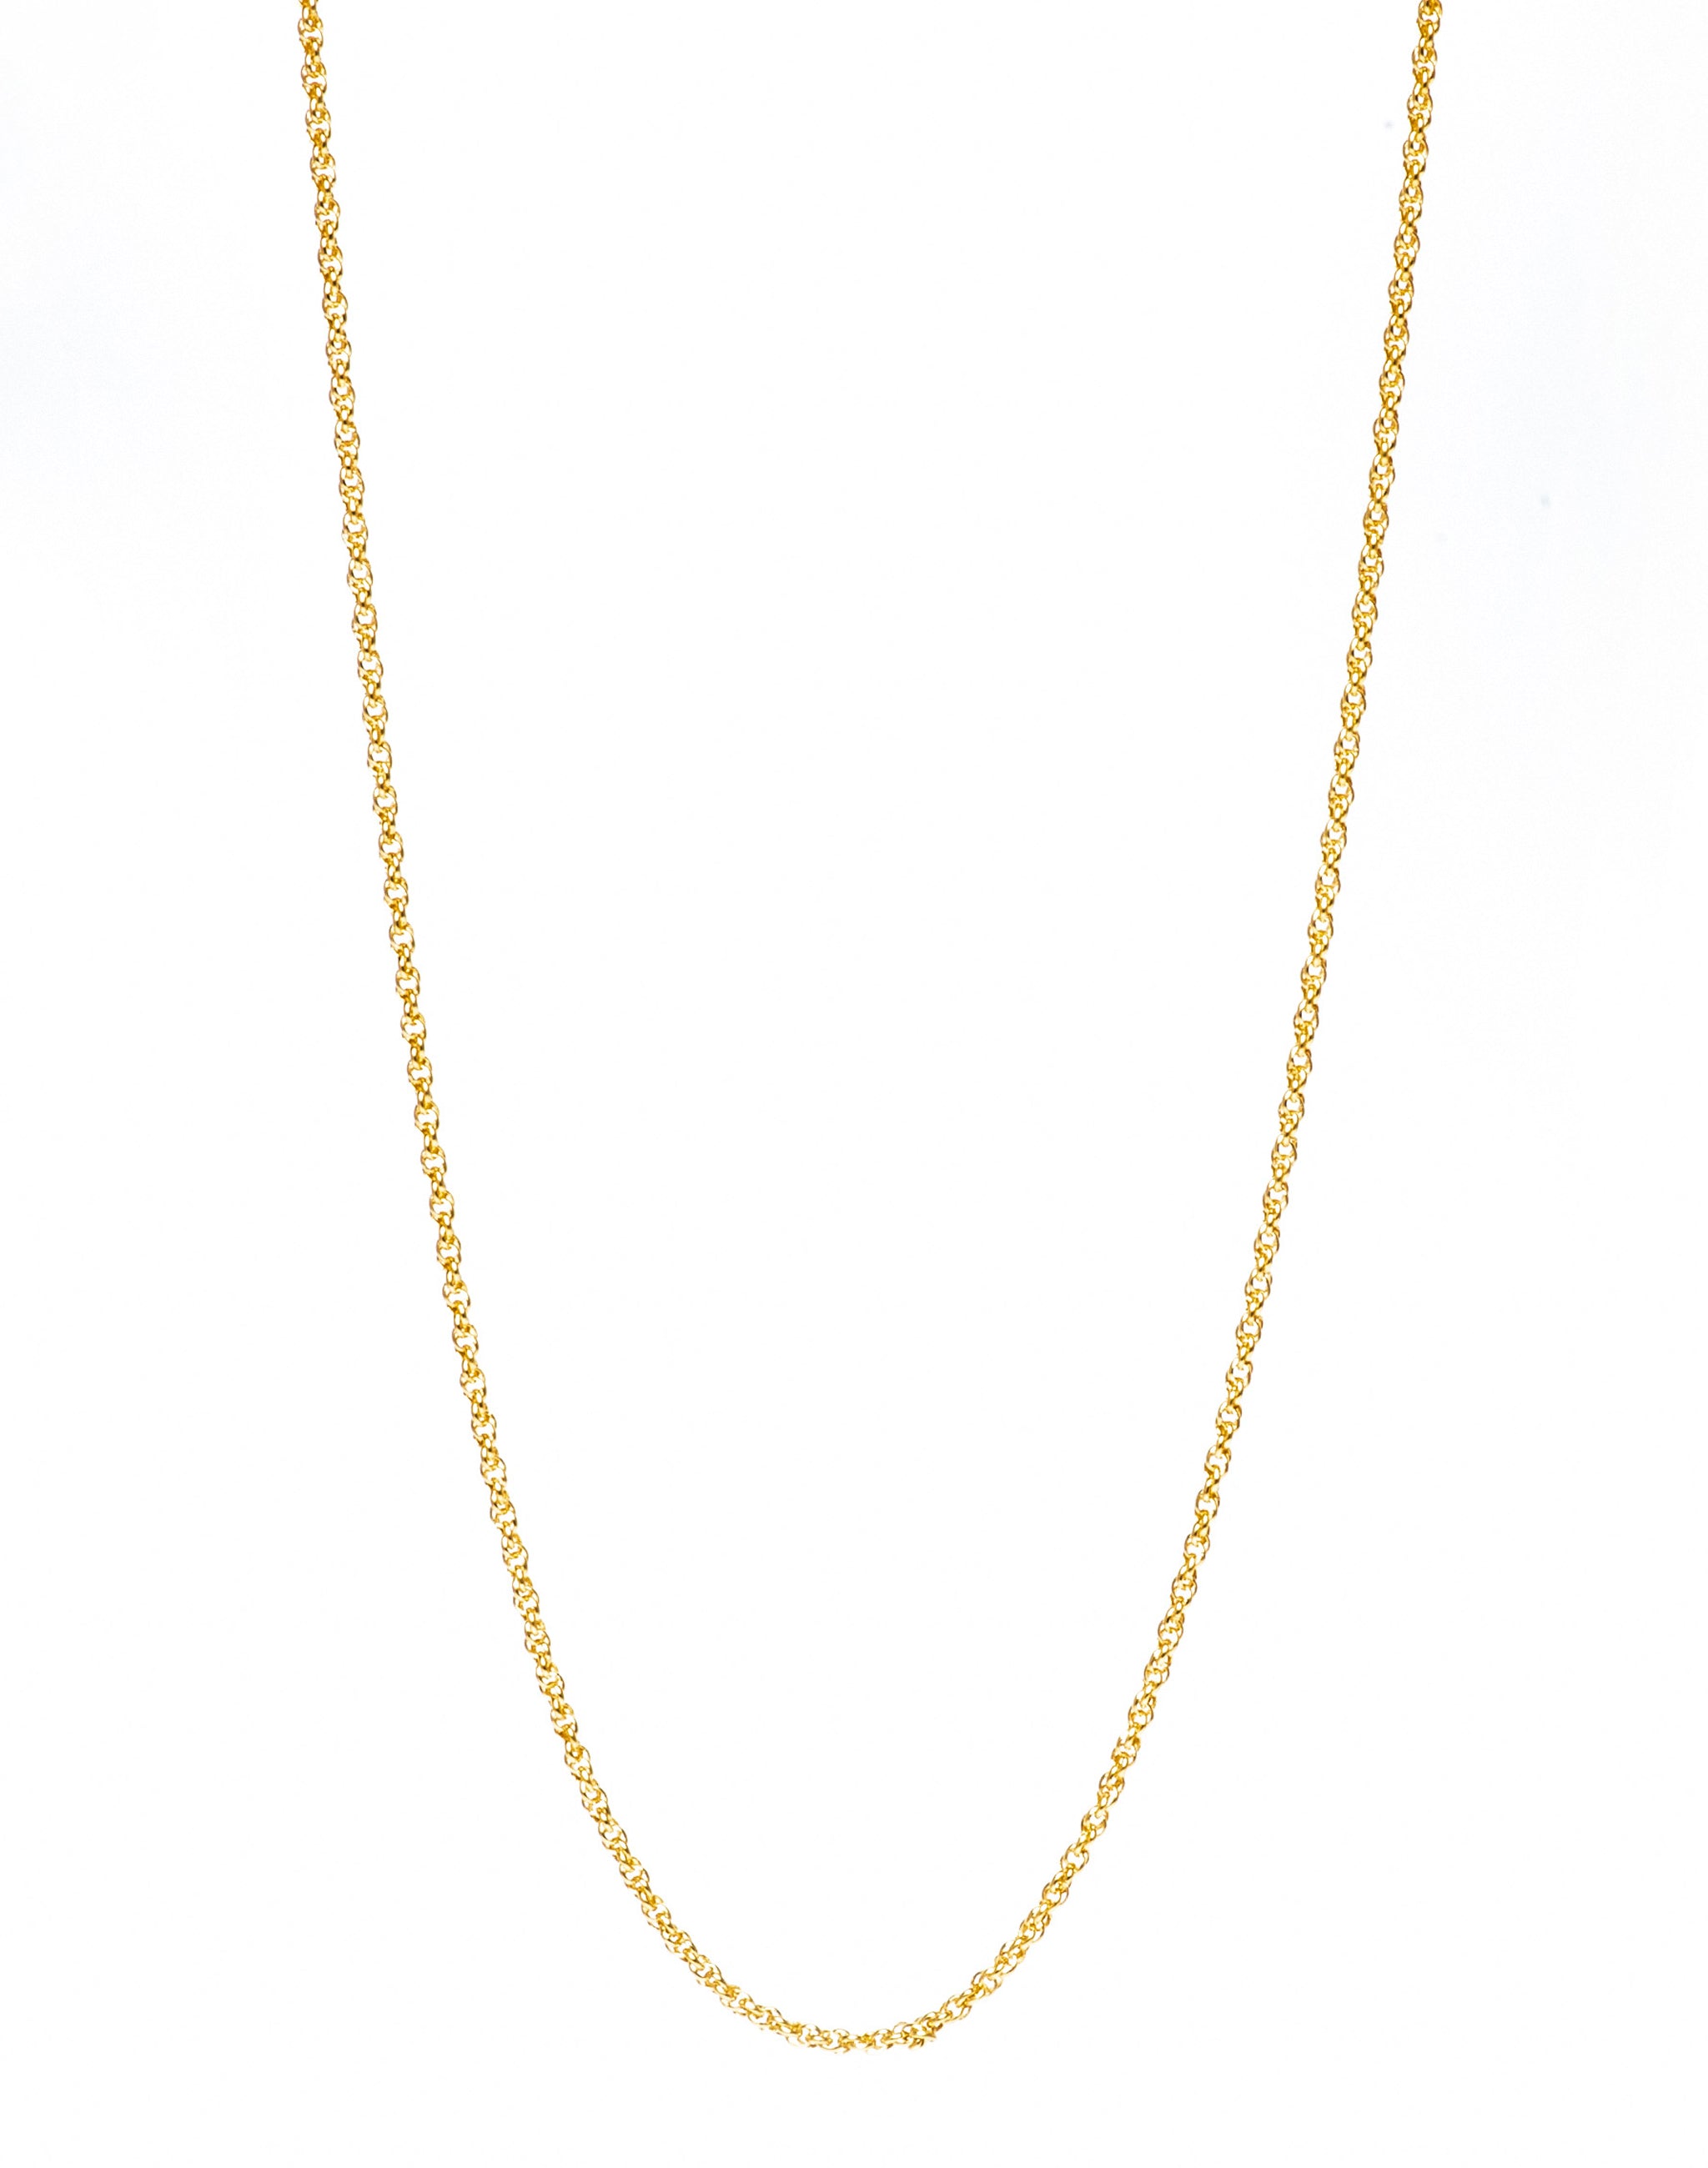 gold SHIRA necklace